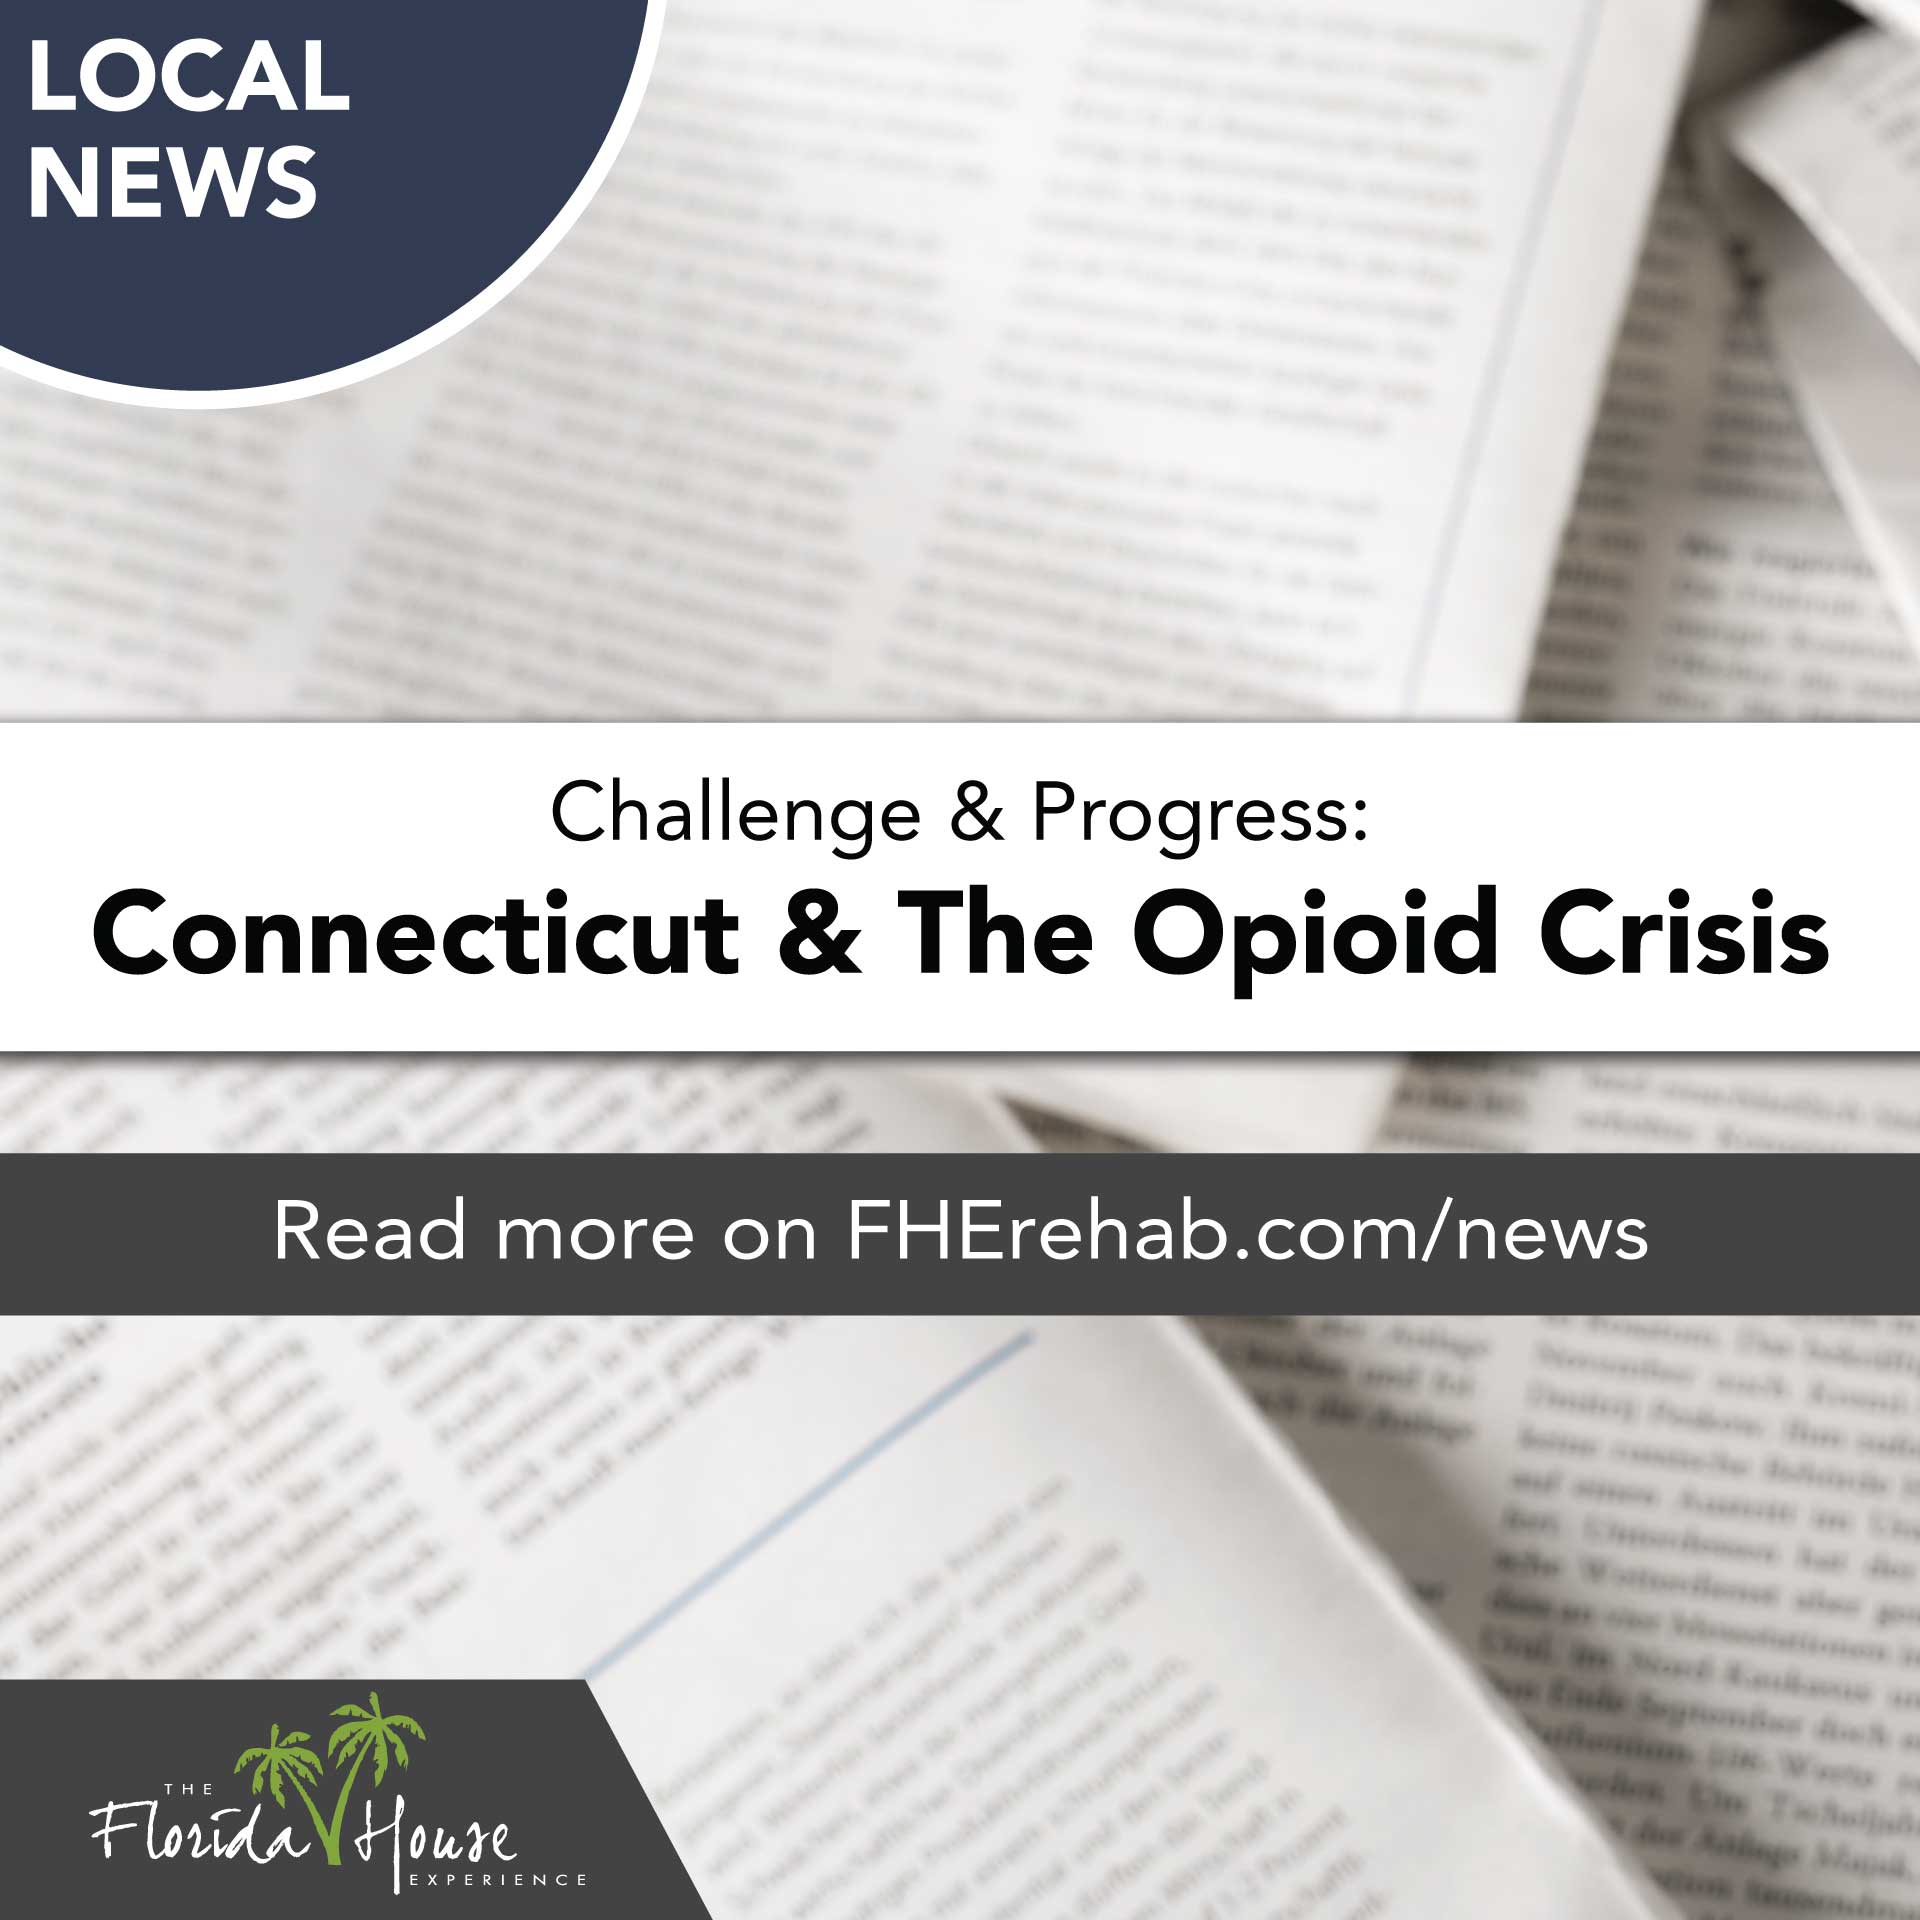 Local News - Connecticut - And the Opioid Crisis